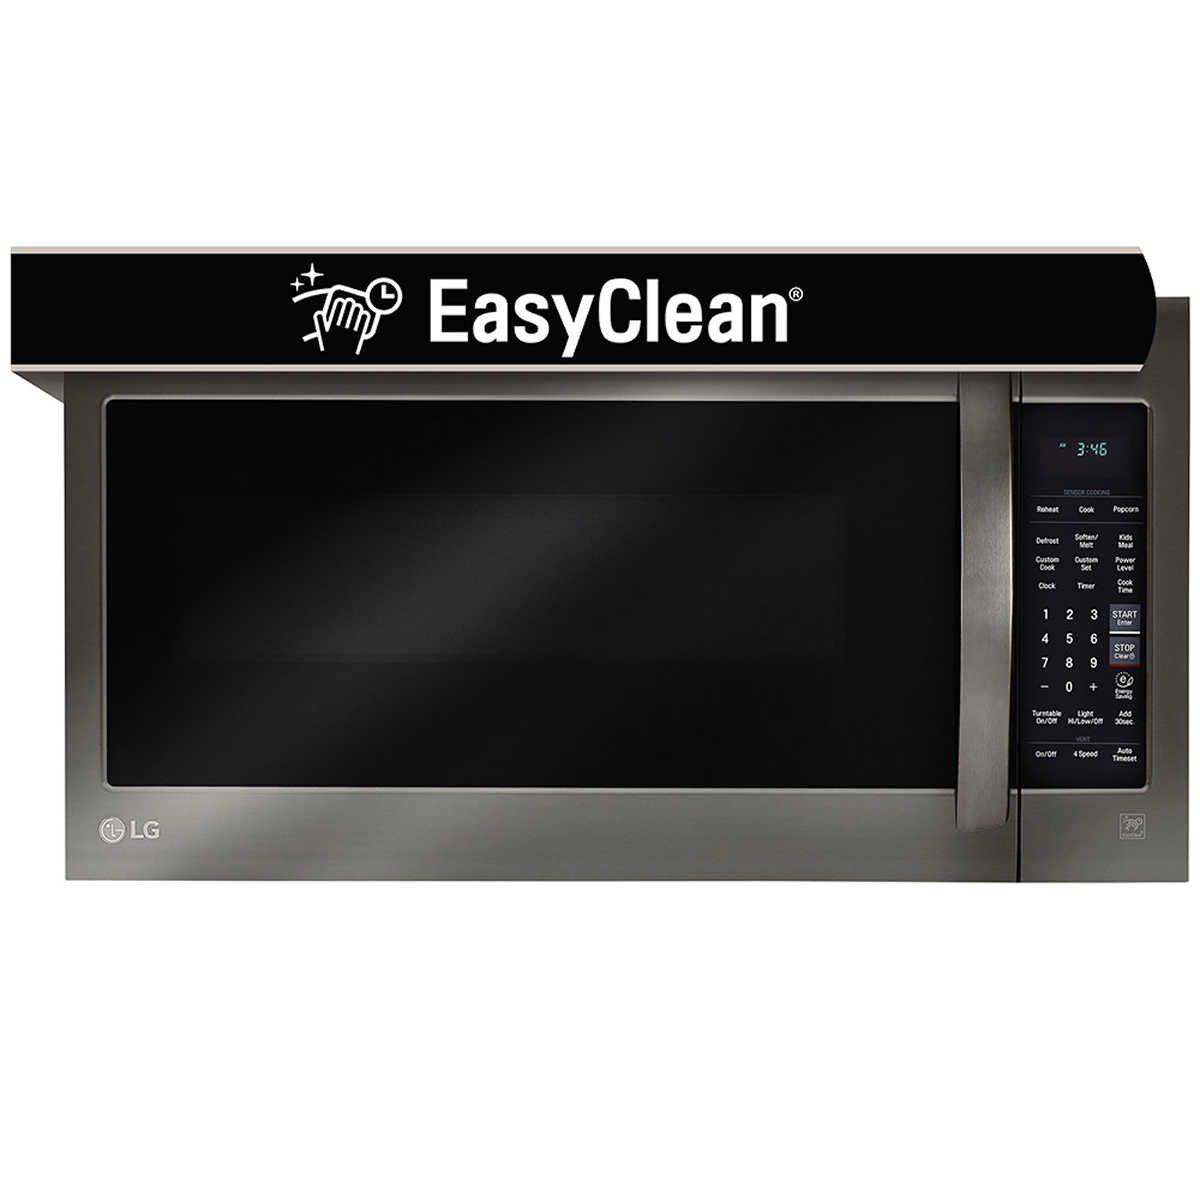 What microwave oven manufacturers are USA based?